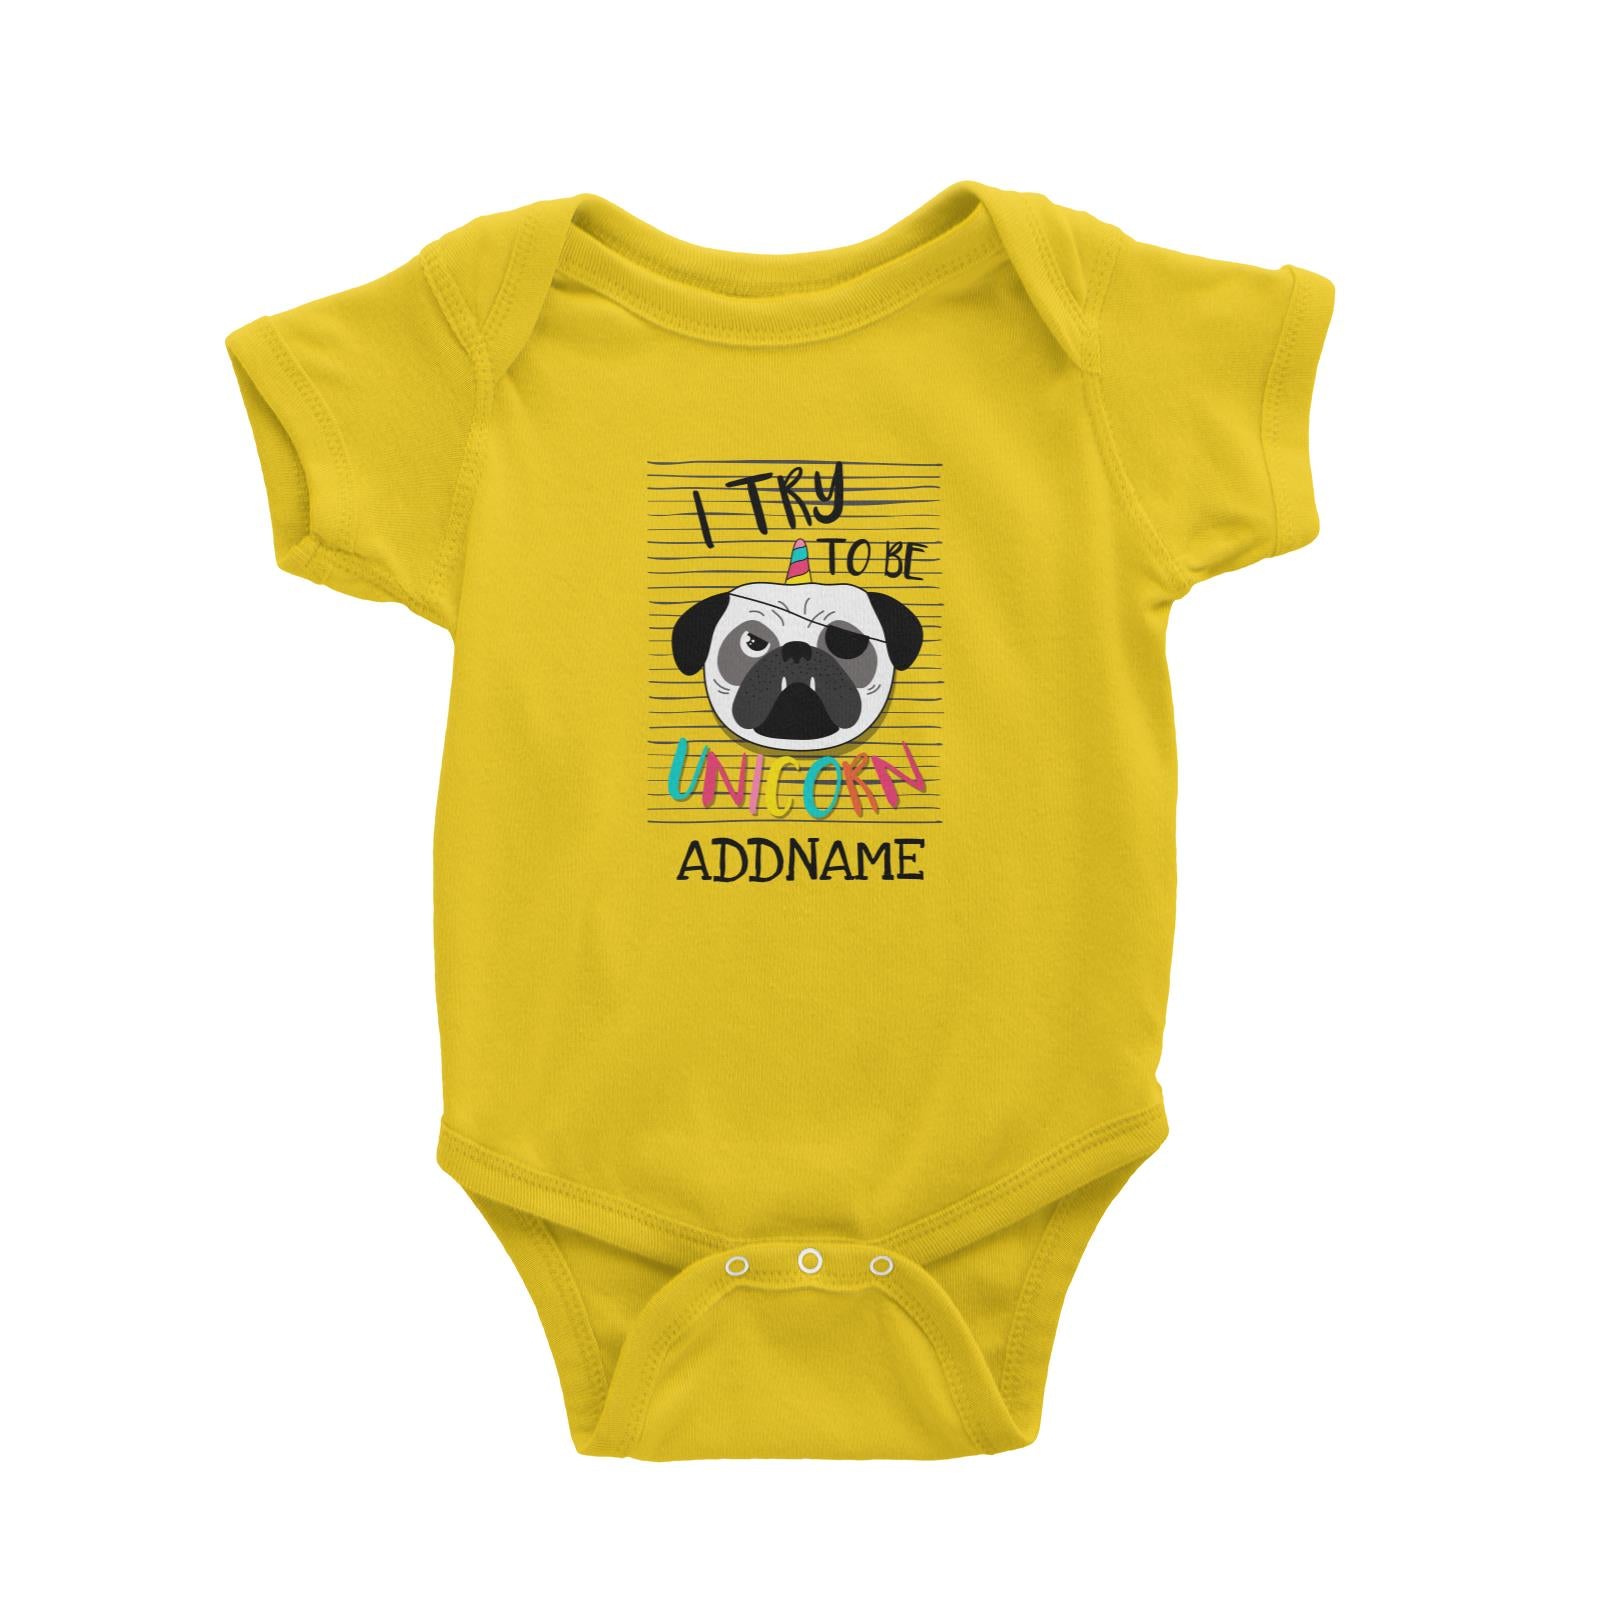 I Try to Be Unicorn Pug Addname Baby Romper